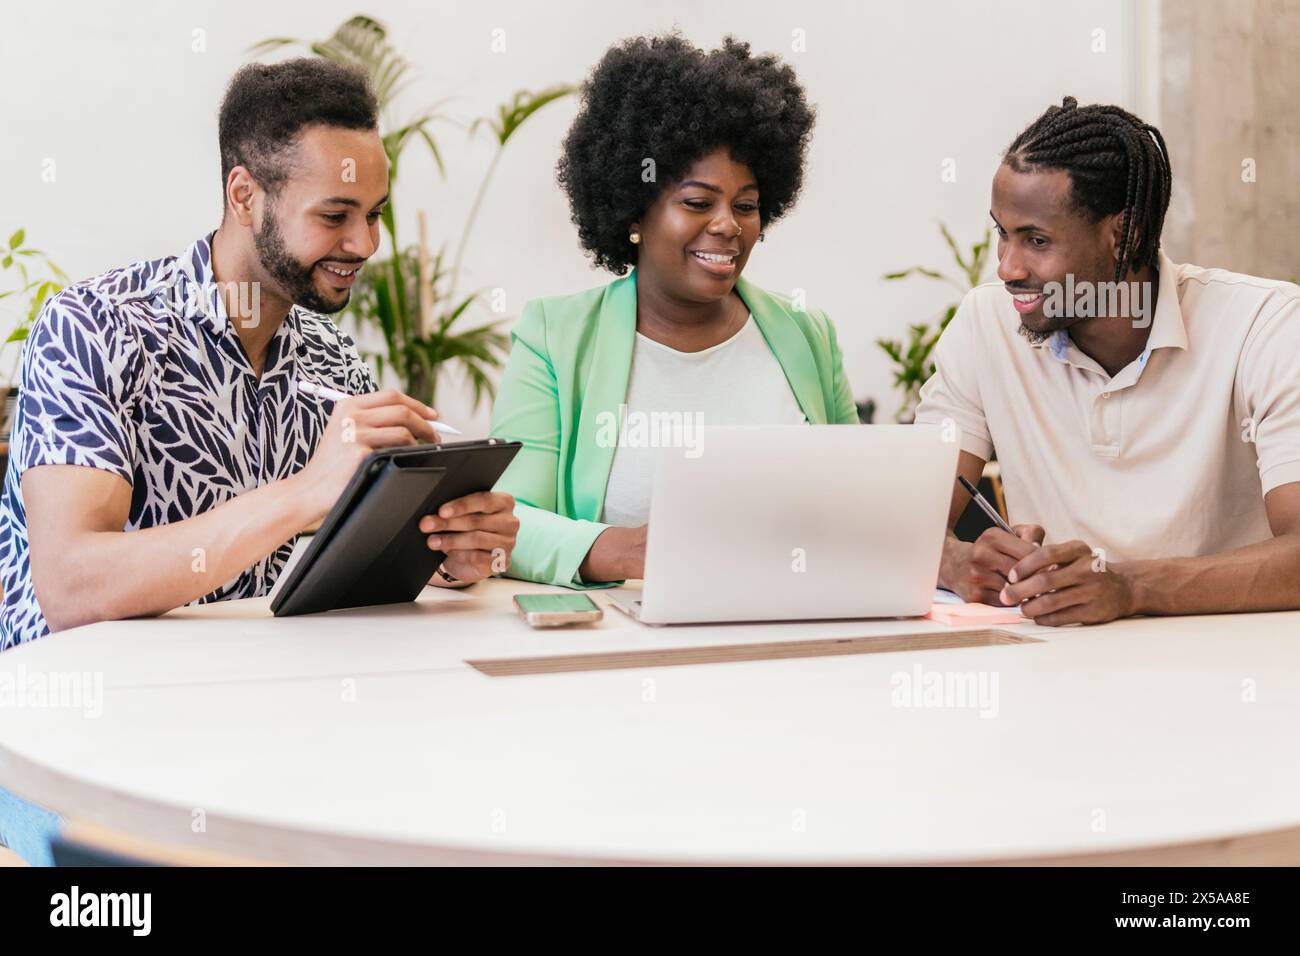 Three professionals engage in a collaborative meeting using a laptop and tablet in a coworking space featuring modern, bright decor Stock Photo